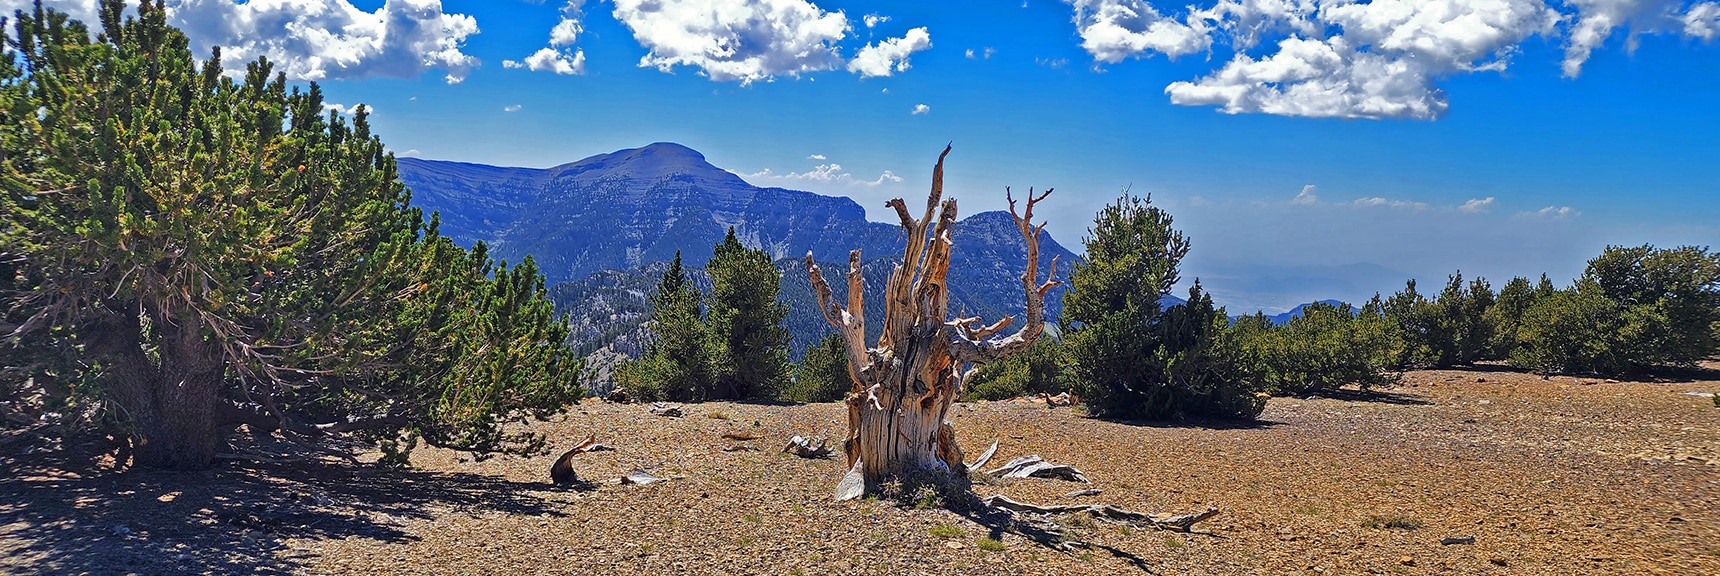 Old Ancient Bristlecone Pine Skeleton Marks "V-Shaped" Final Approach Opening | Mummy Mountain Grand Crossing | Lee Canyon to Deer Creek Road | Mt Charleston Wilderness | Spring Mountains, Nevada |